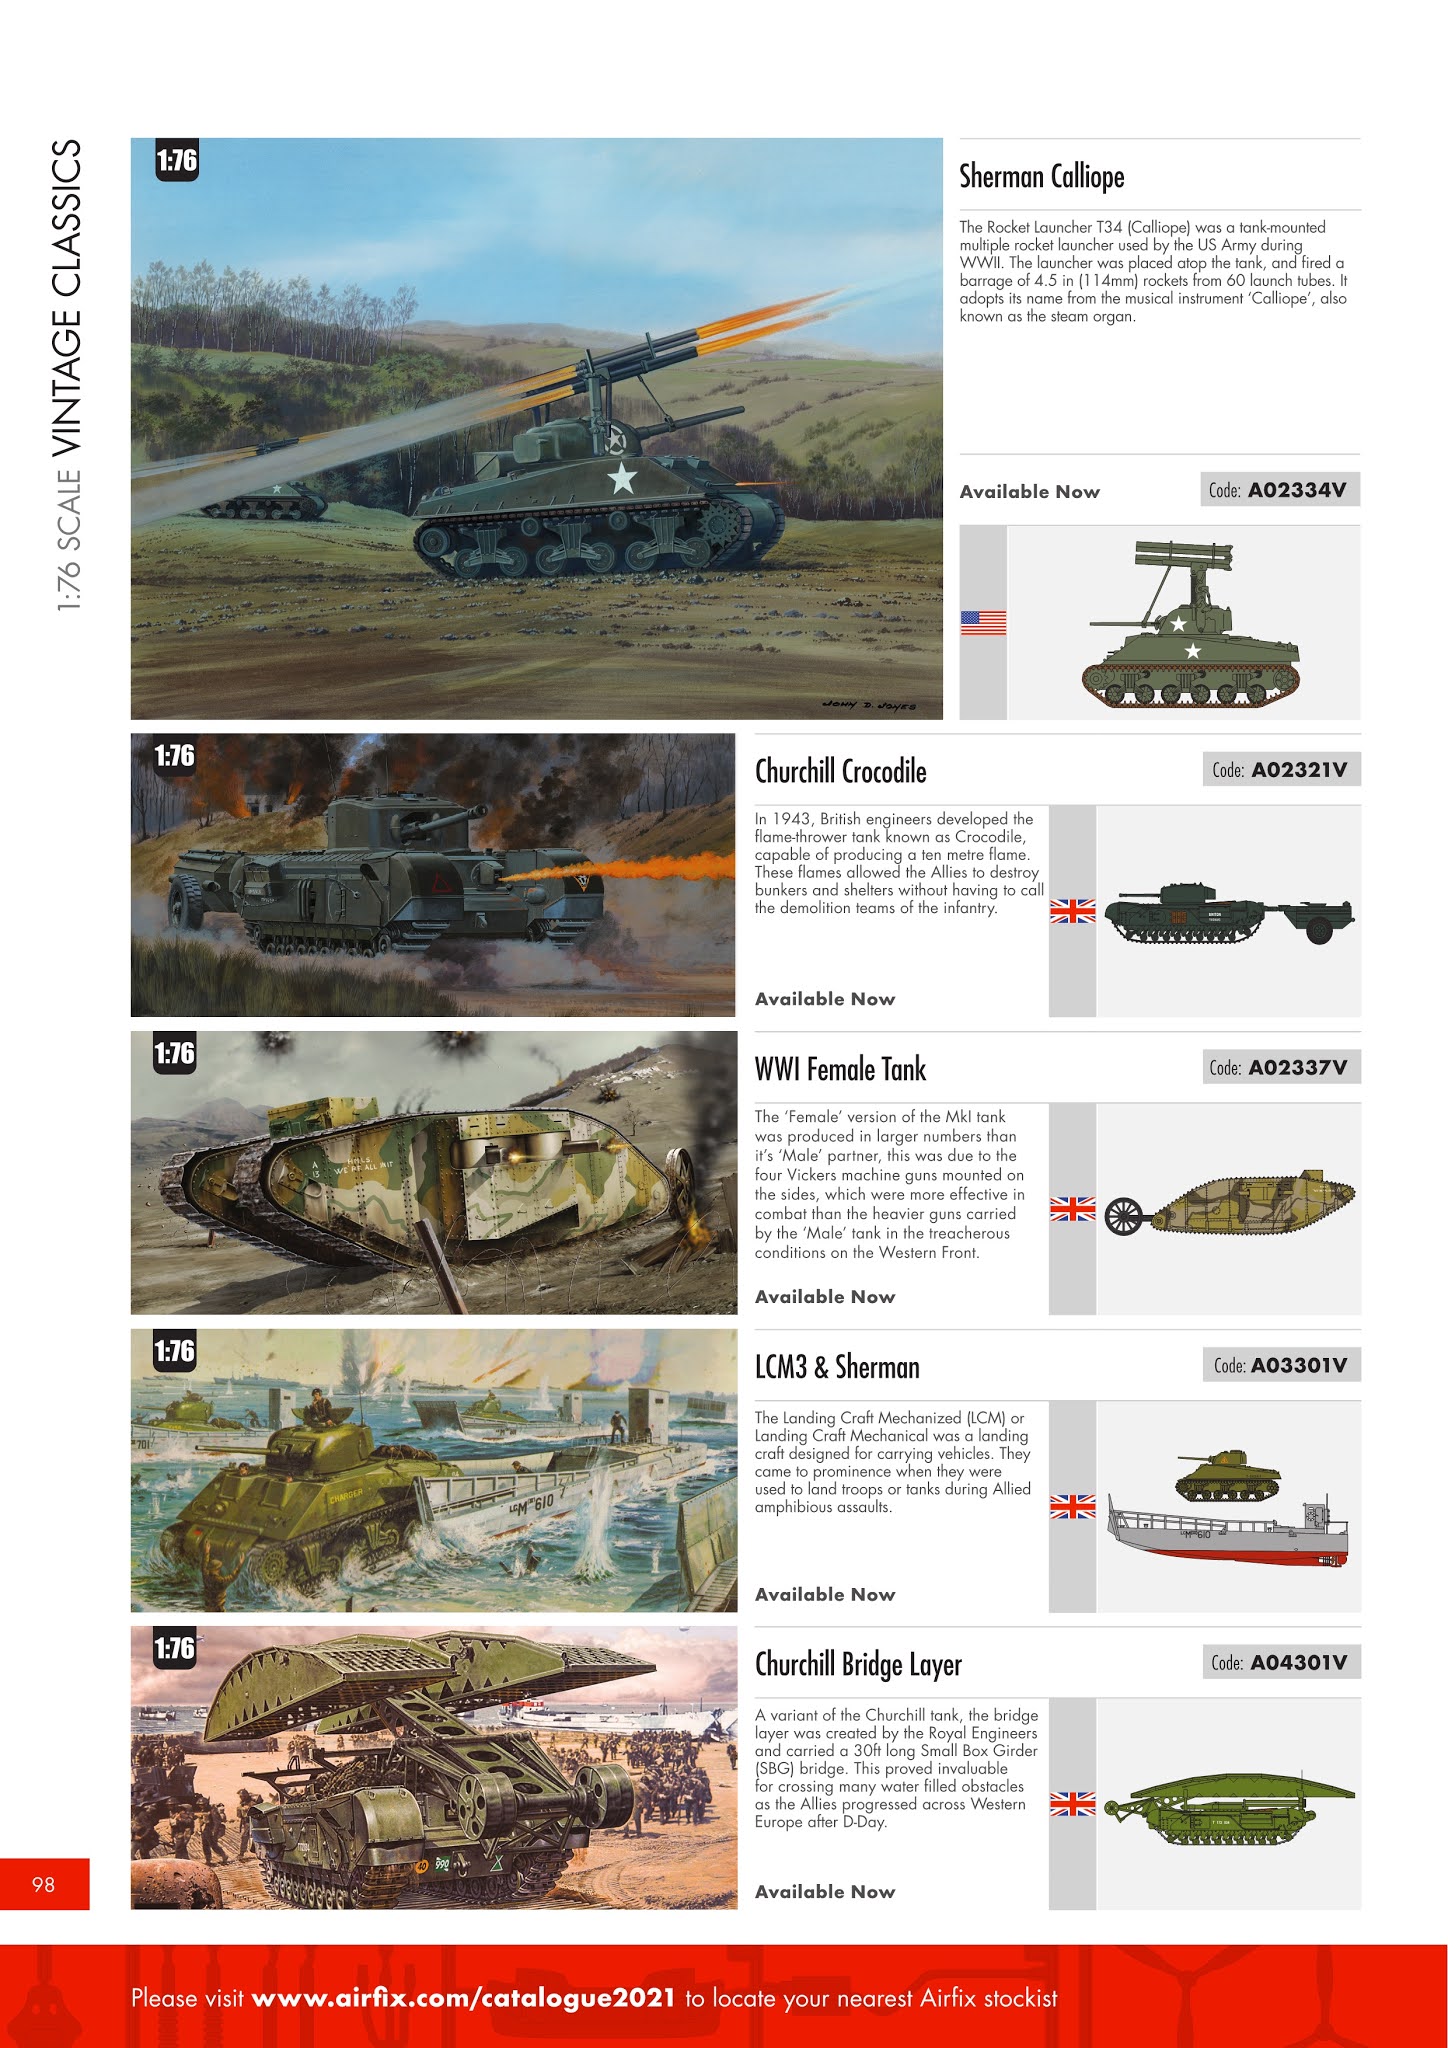 The Modelling News: Preview: Airfix 2021 Catalogue in digital form...